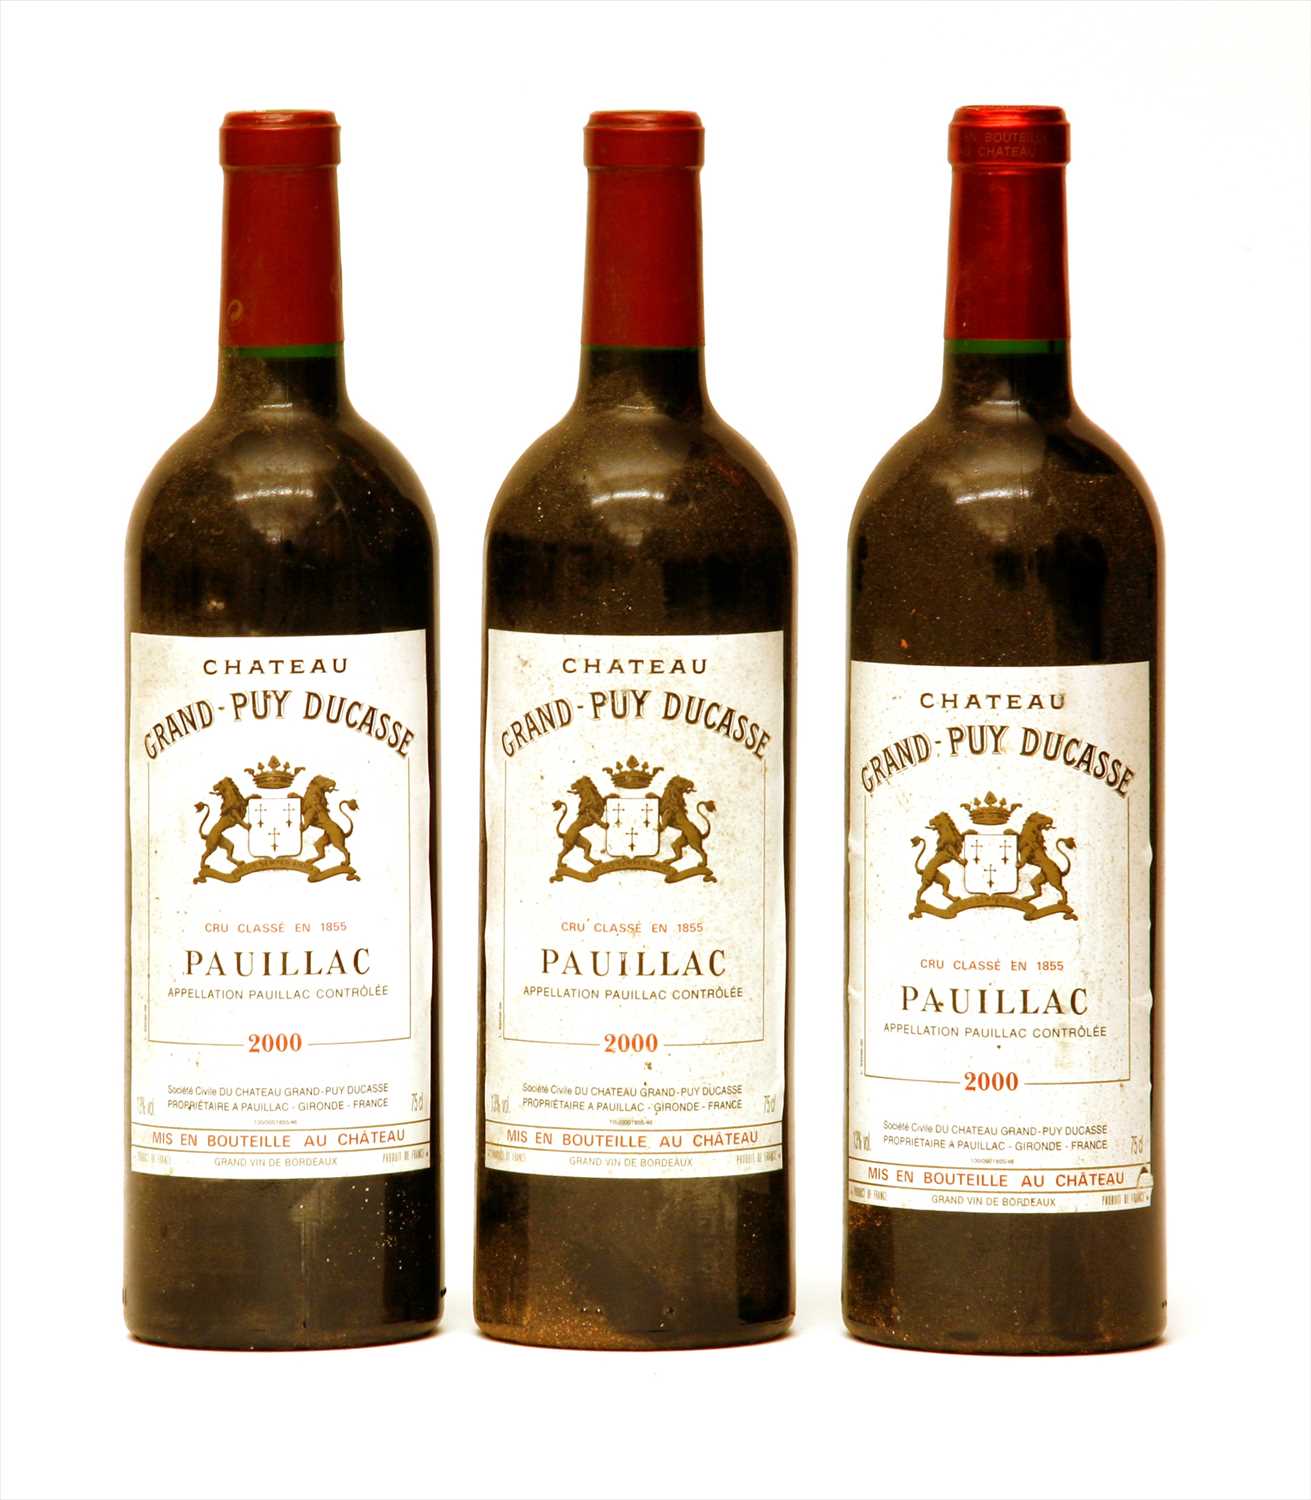 Lot 251 - Chateau Grand-Puy Ducasse, Pauillac, 5th growth, 2000, three bottles